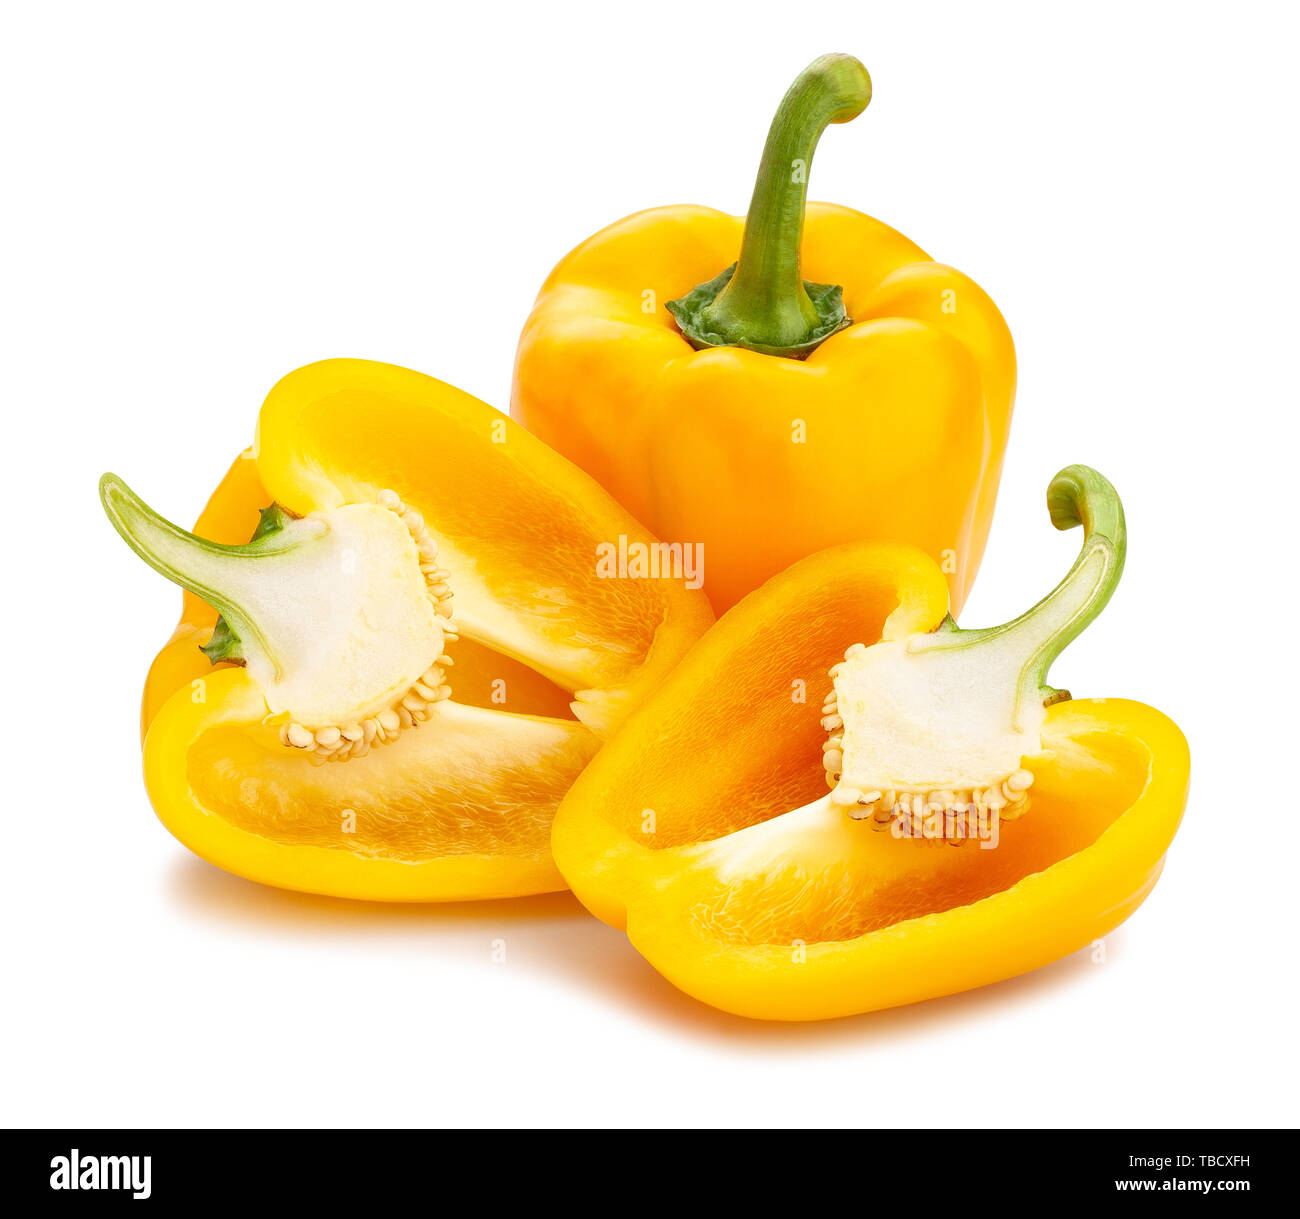 sliced yellow bell pepper path isolated on white Stock Photo